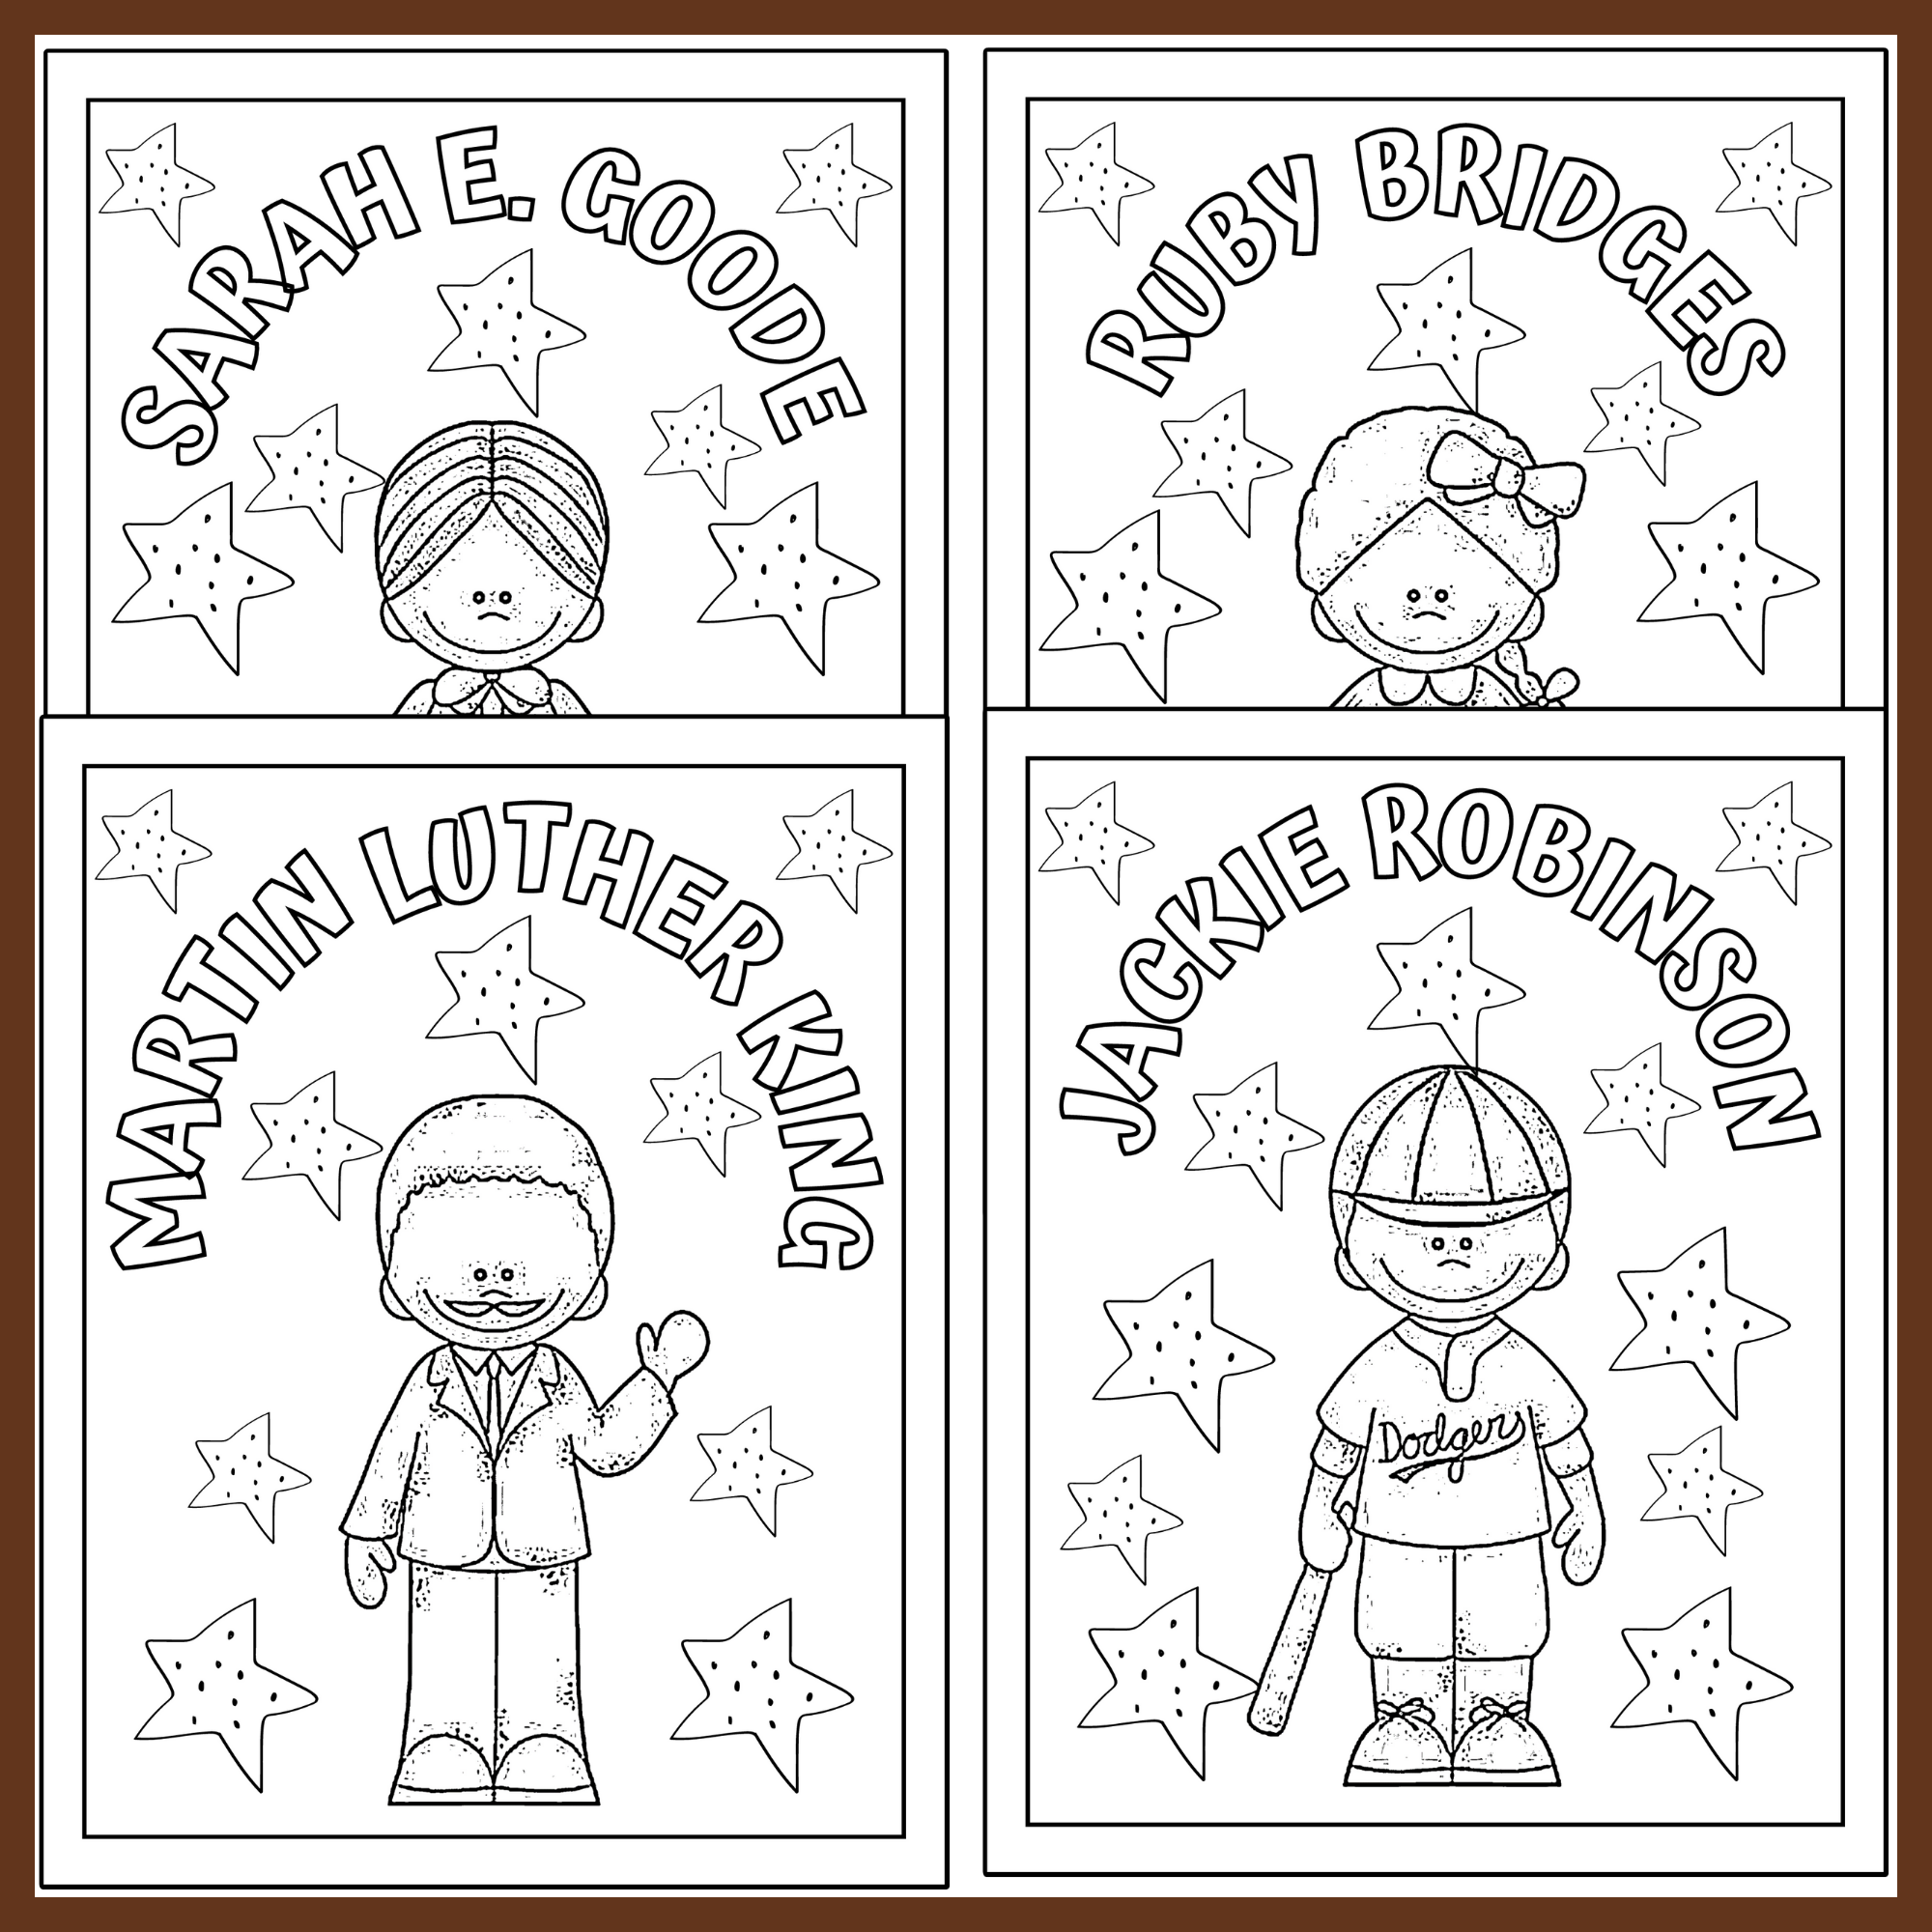 Important figures in black history month coloring pages black history month made by teachers